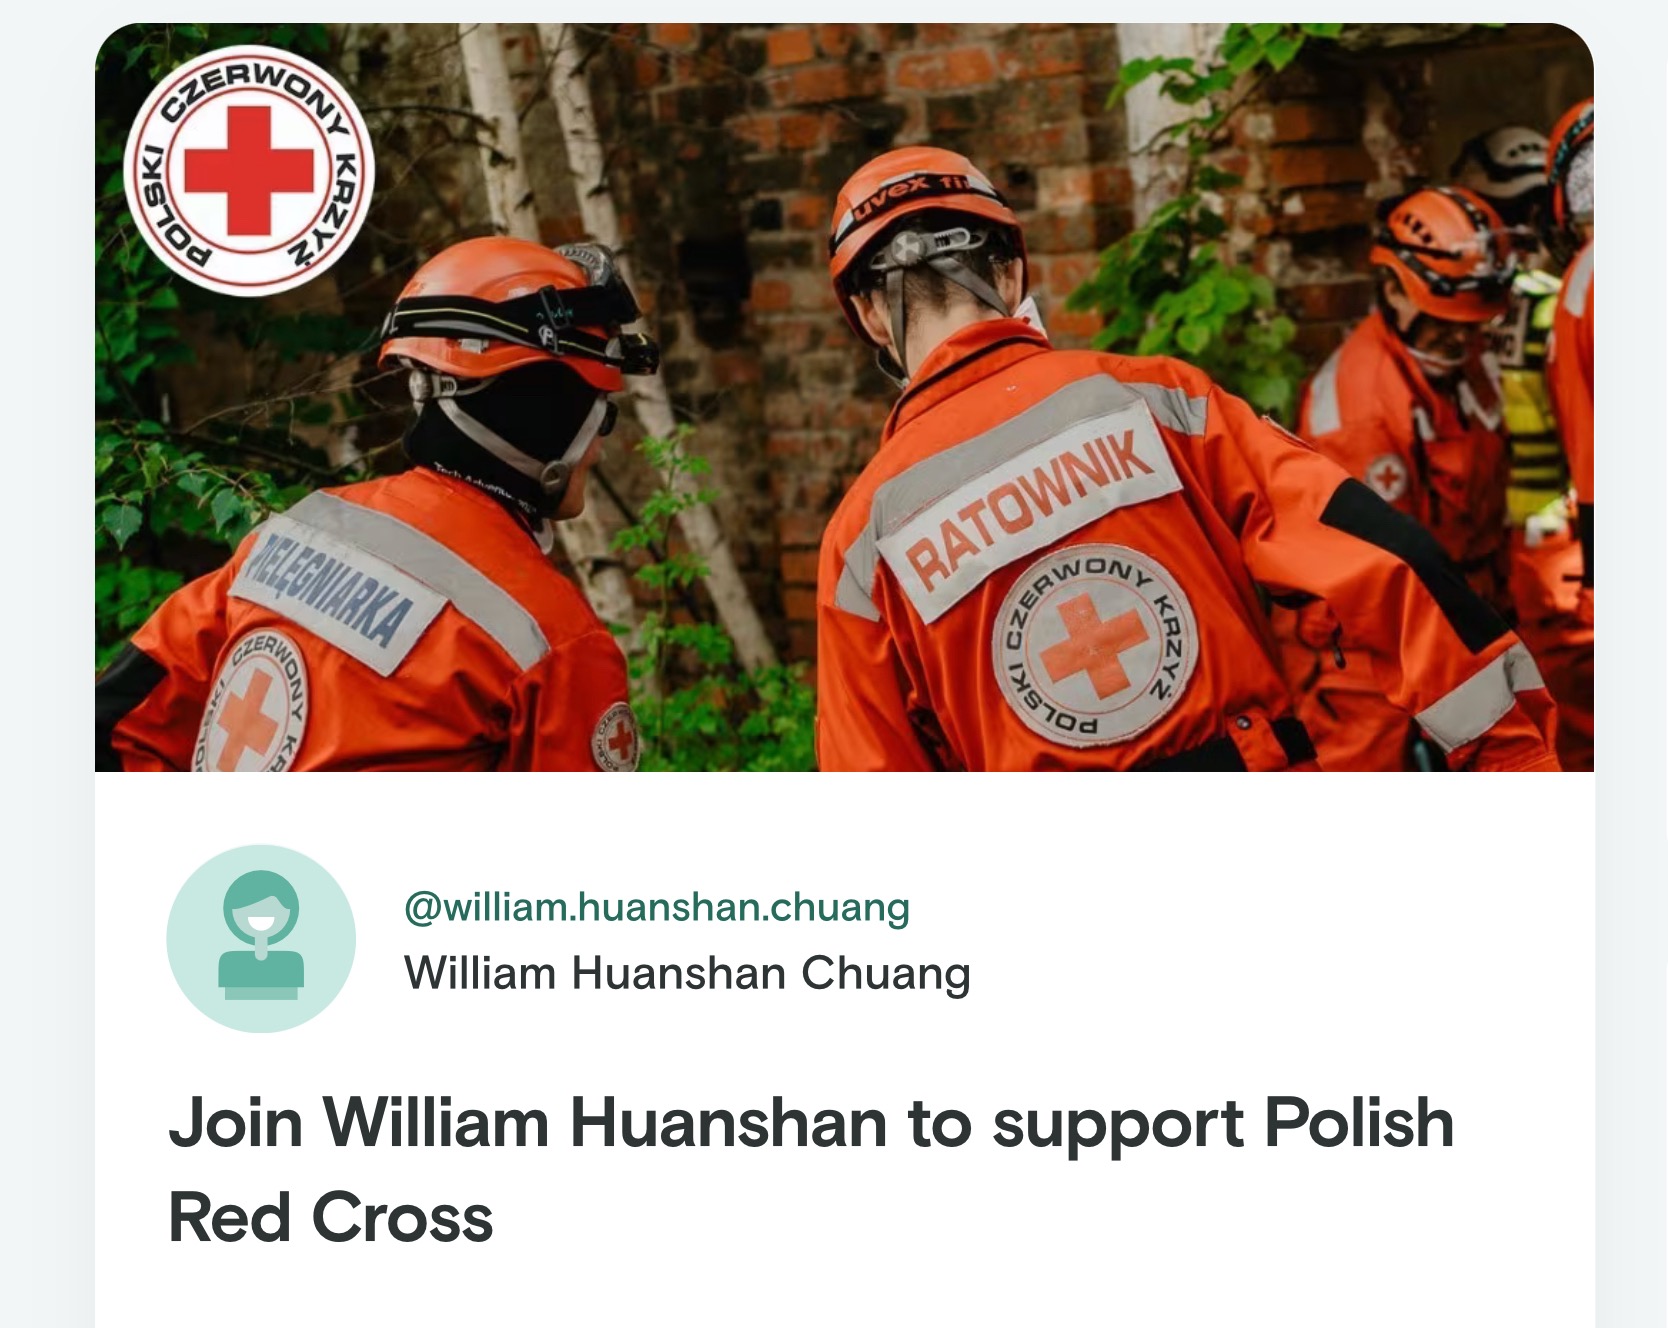 Join-William-Chuang-to-support-Polish-Red-Cross.jpeg